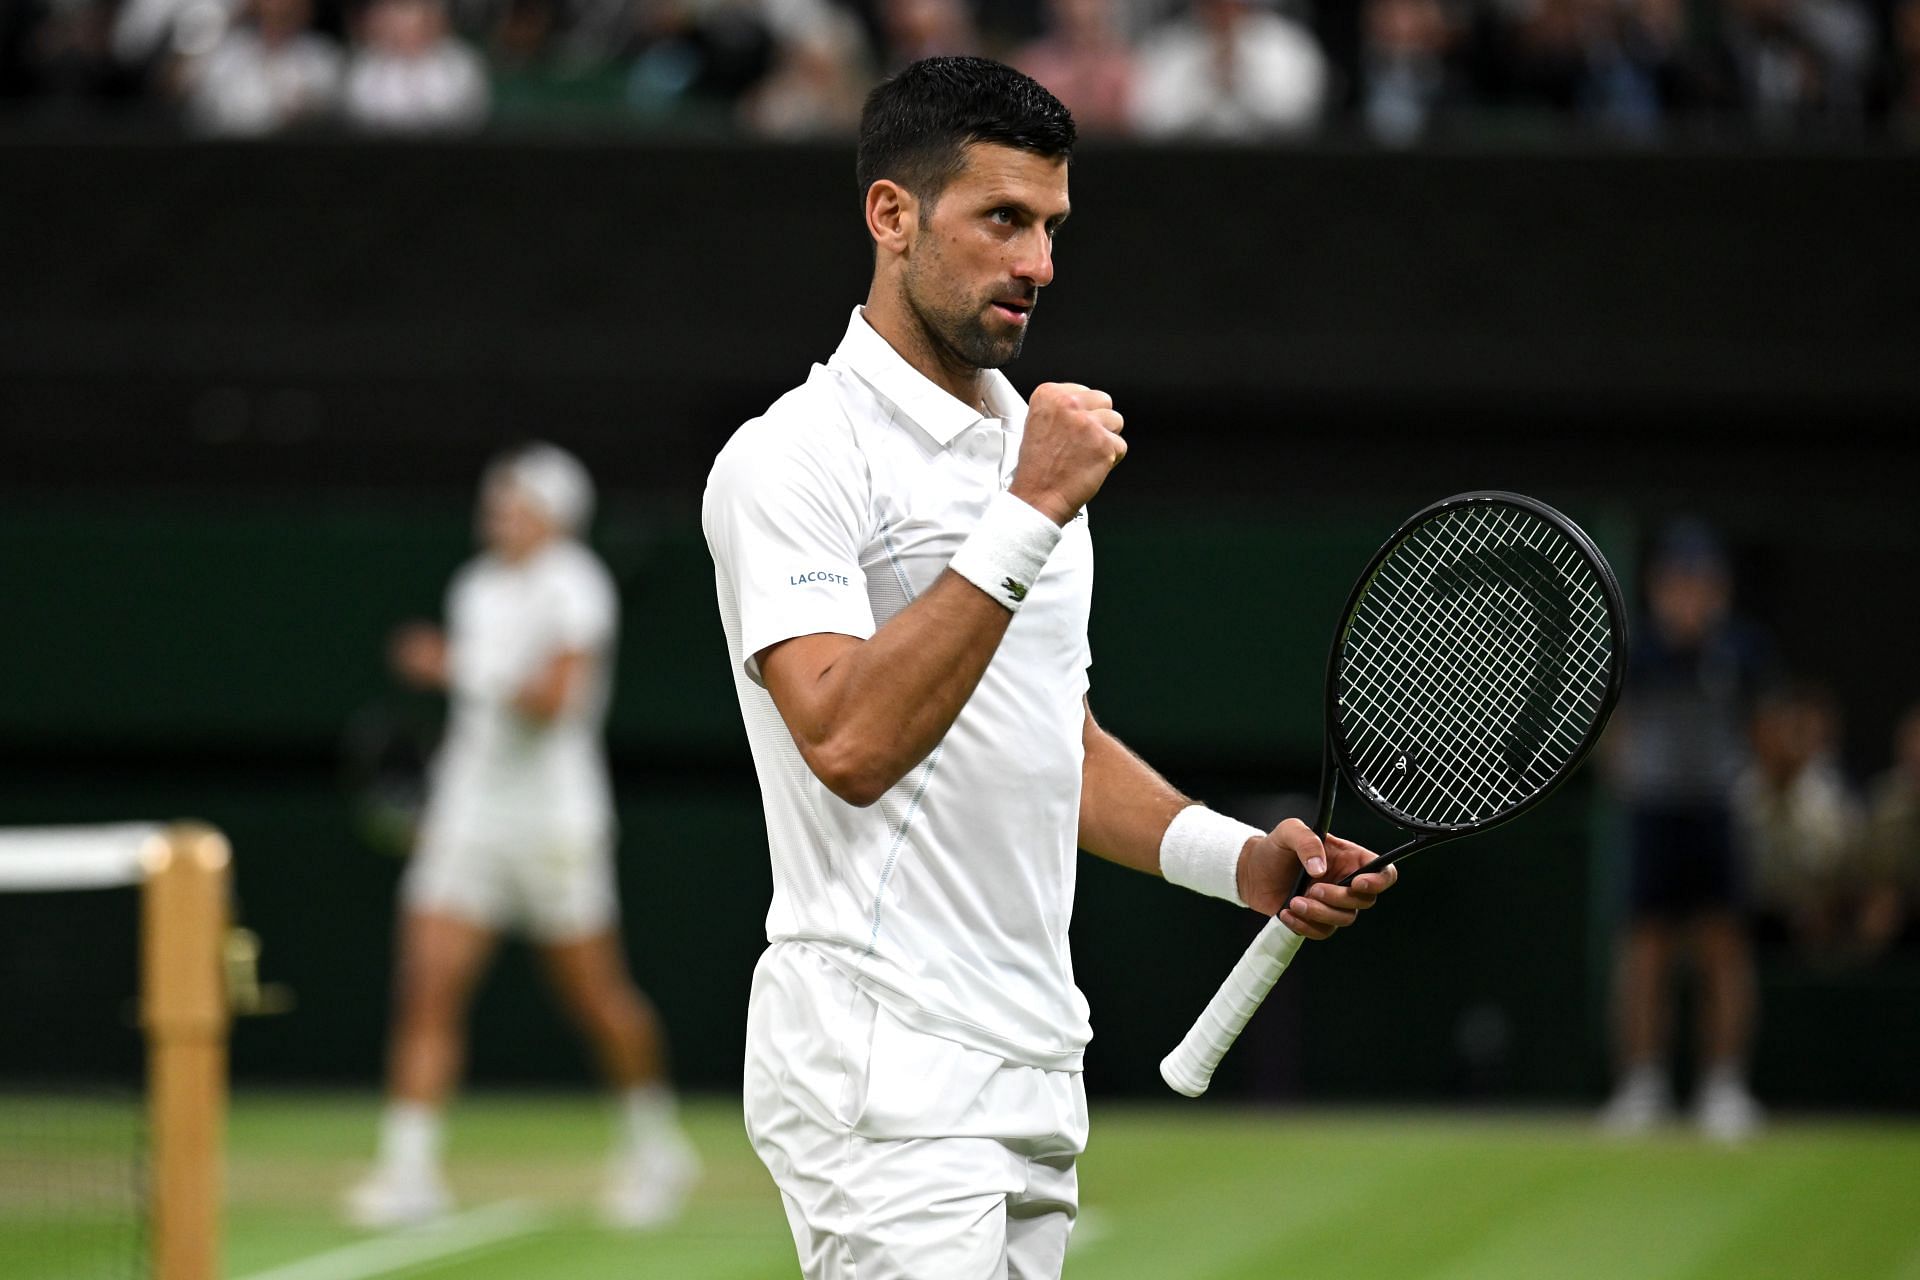 Should Novak Djokovic have avoided picking a fight against Wimbledon Centre Court crowd ahead of his quarterfinal clash?